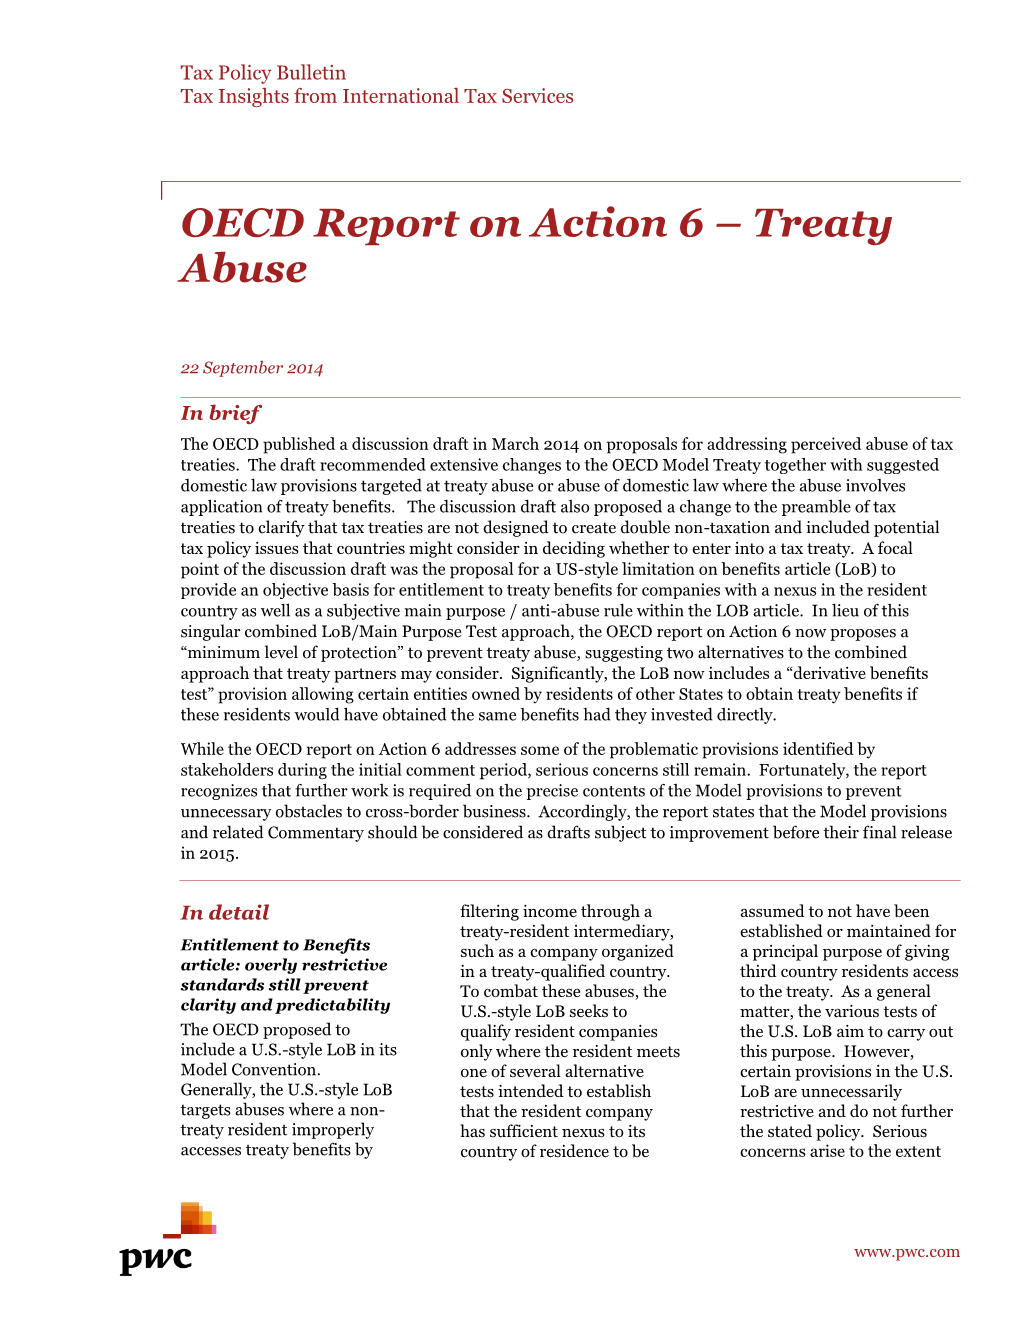 OECD Report on Action 6 – Treaty Abuse